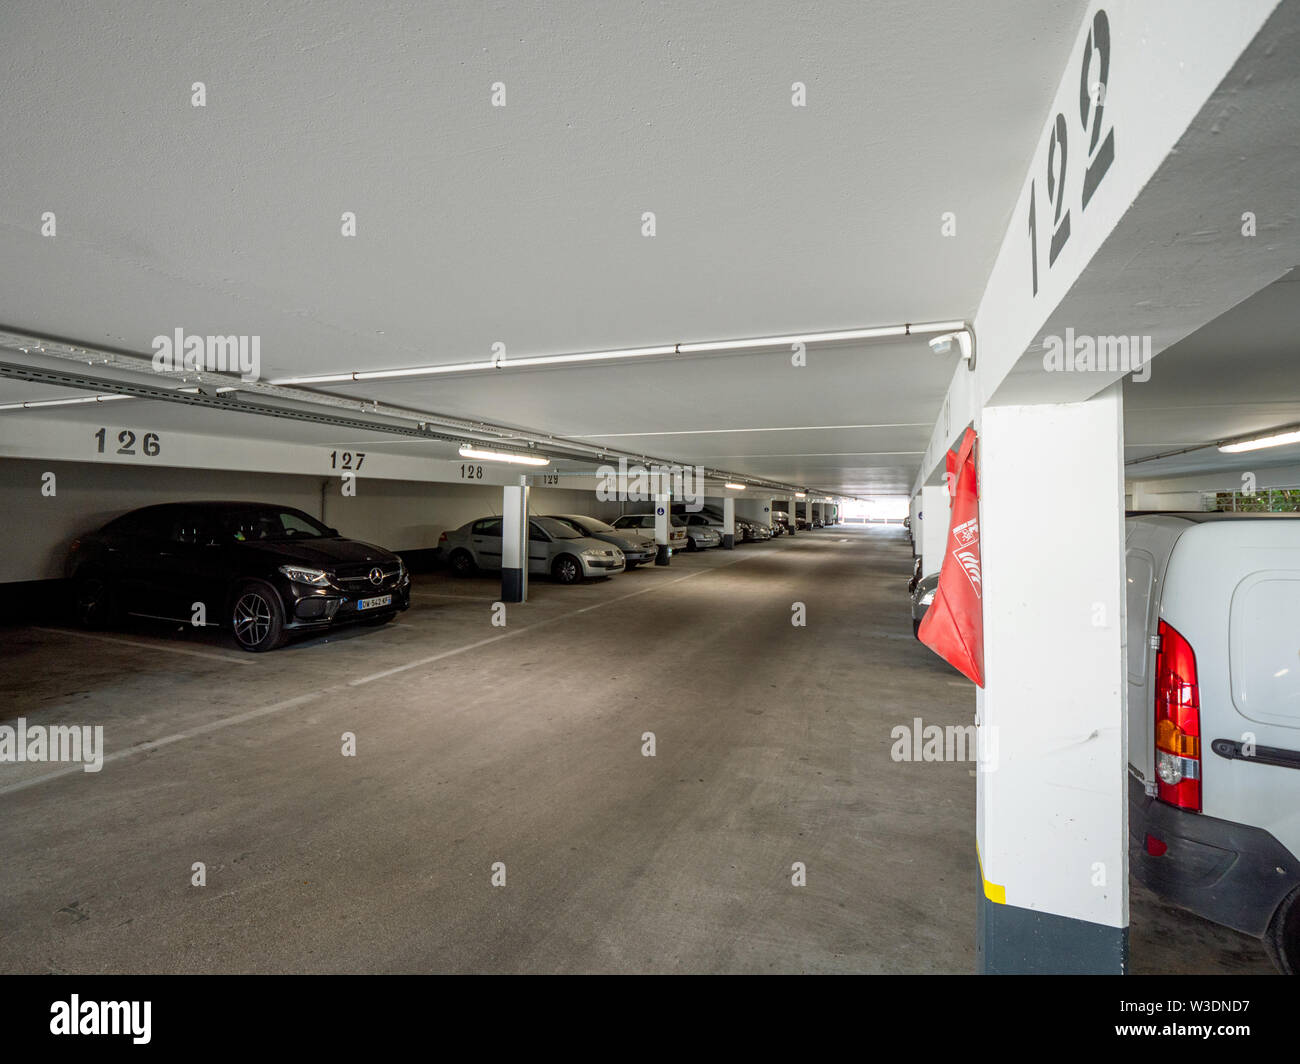 Saint-Gratien, France - Jul 15, 2018: Wide view over interior of modern parking with Mercedes-Benz SUB and other cars Stock Photo